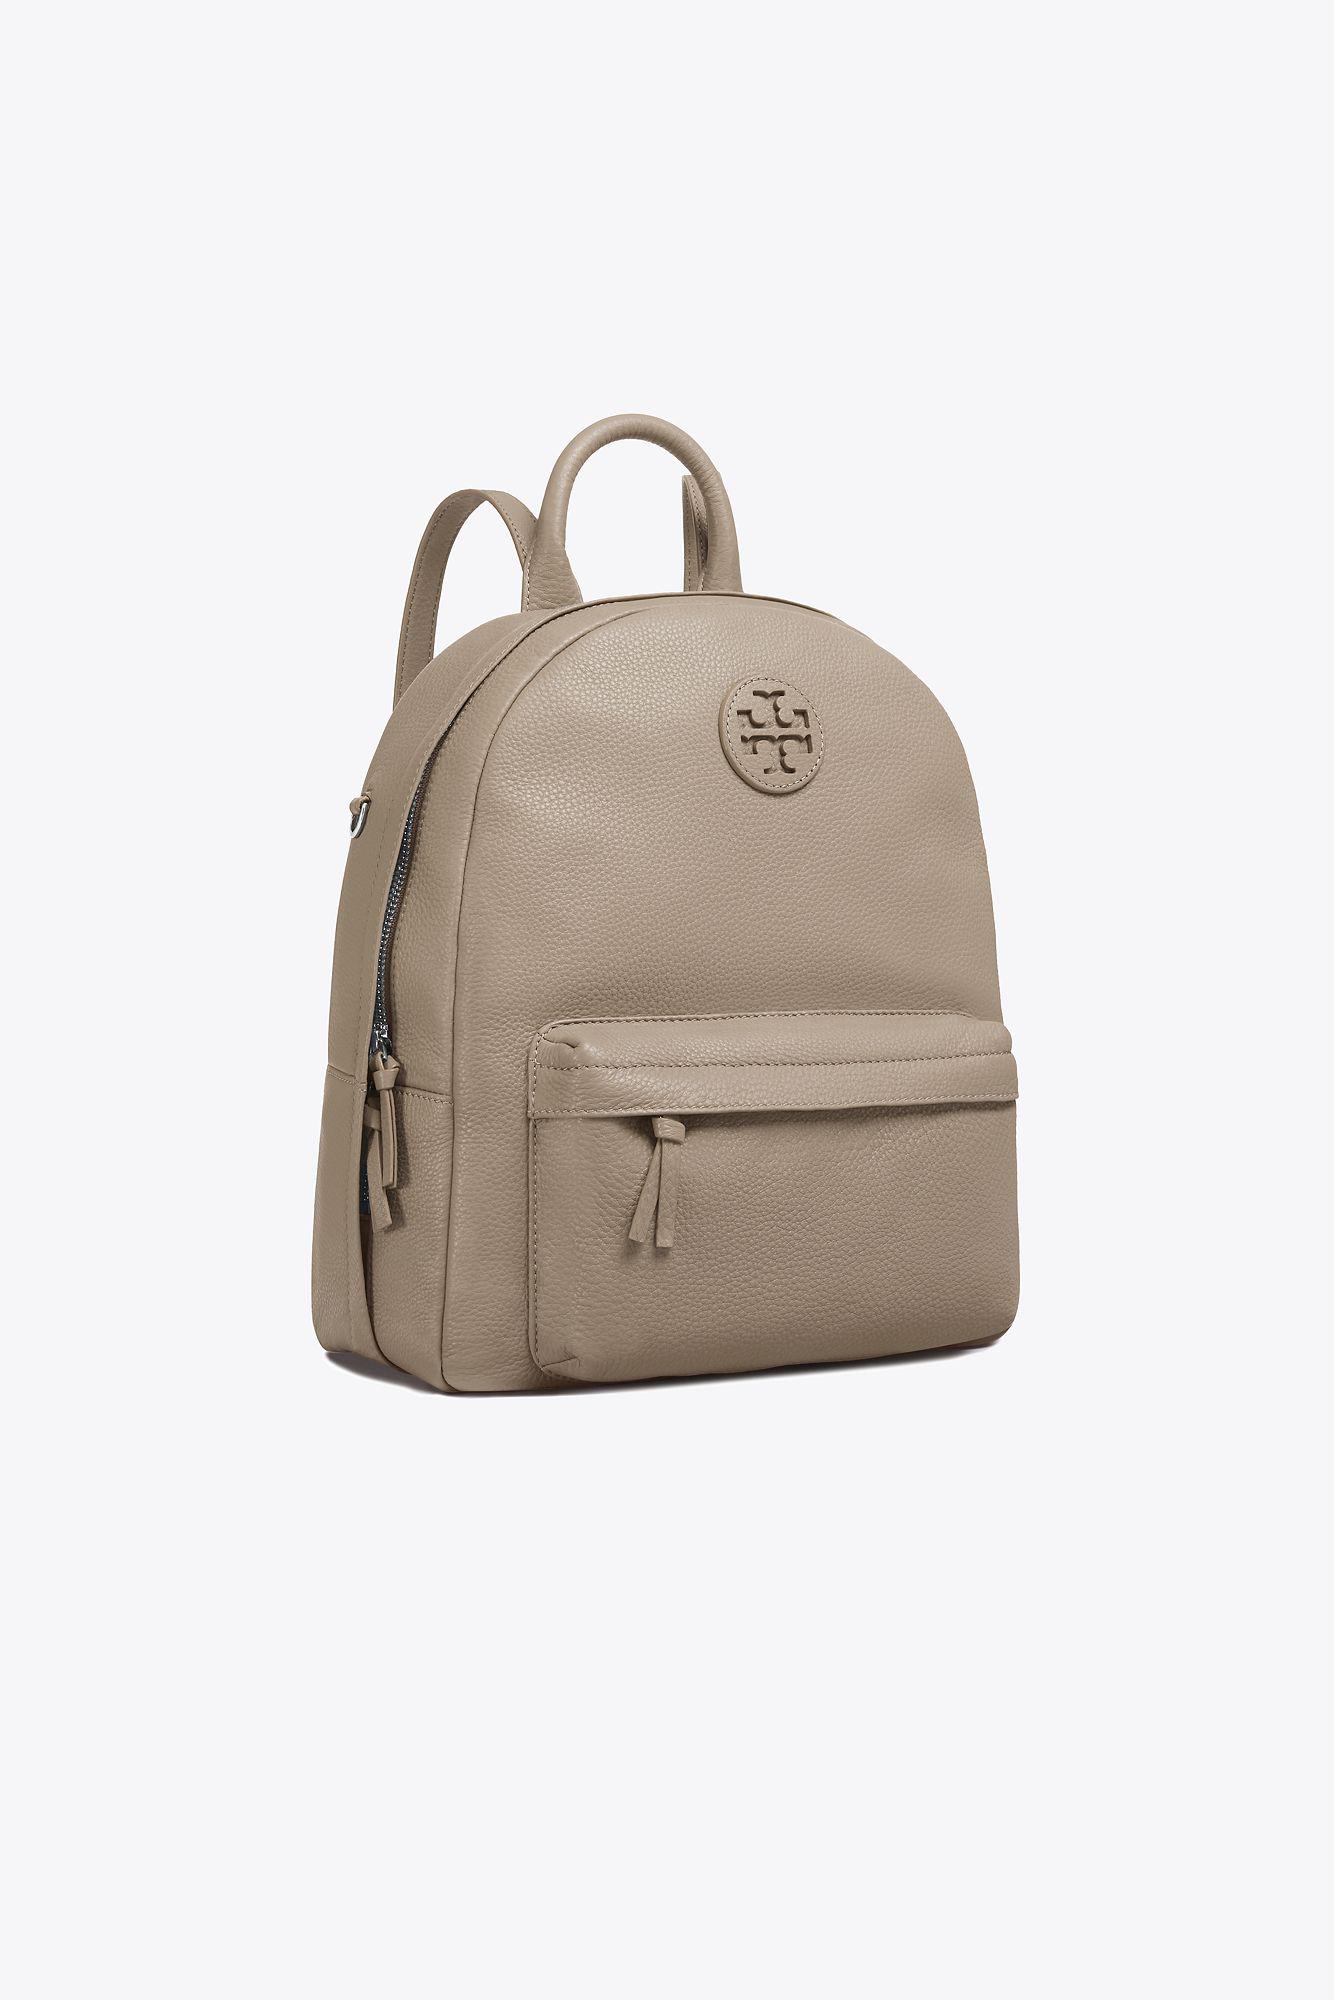 Tory Burch, Bags, Tory Burch Leather Backpack